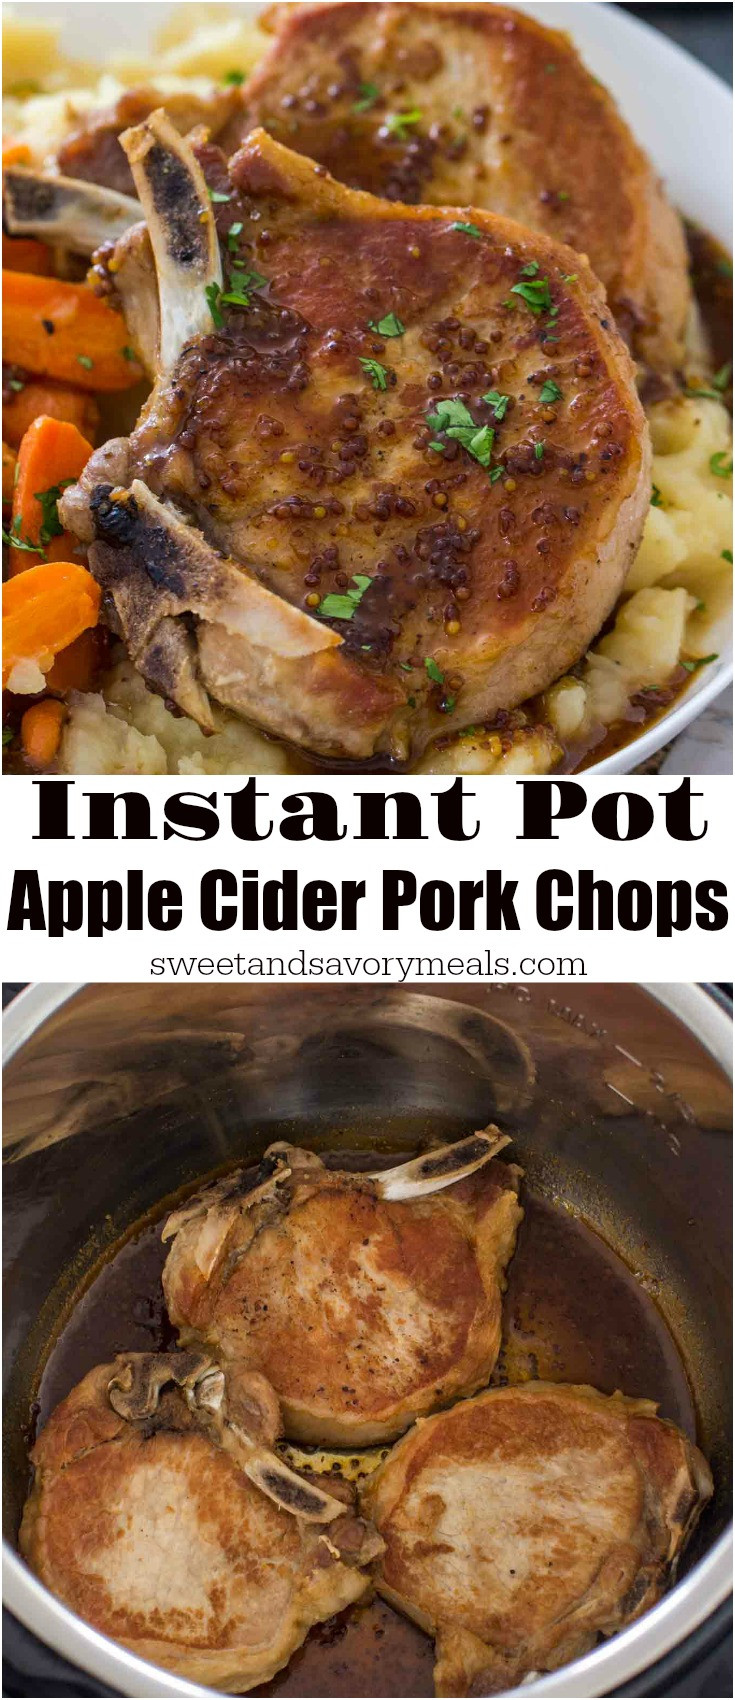 pork chops and applesauce quote